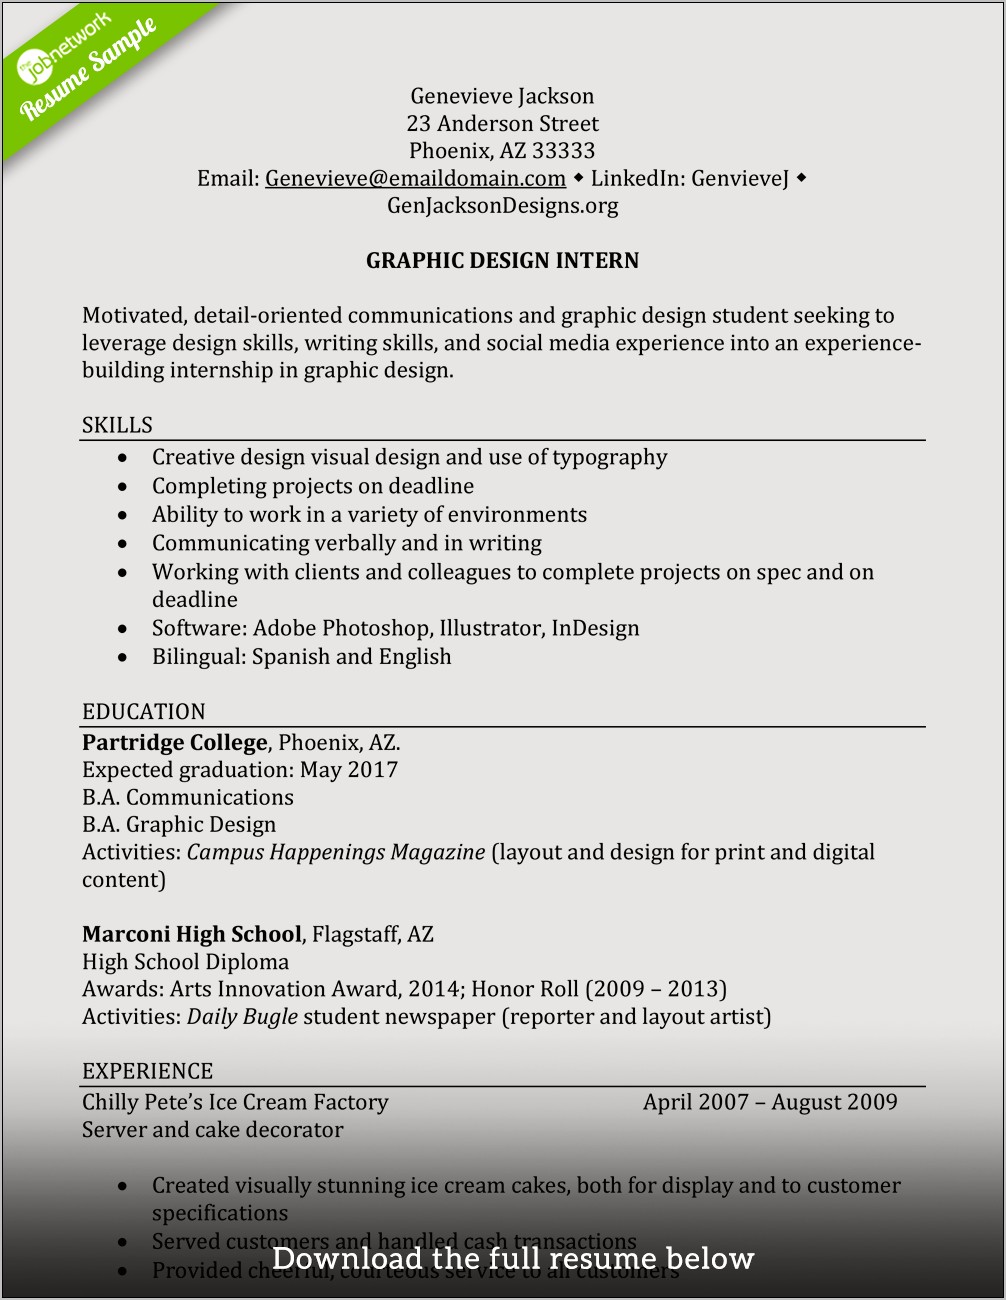 College Or Work Experience First On Resume